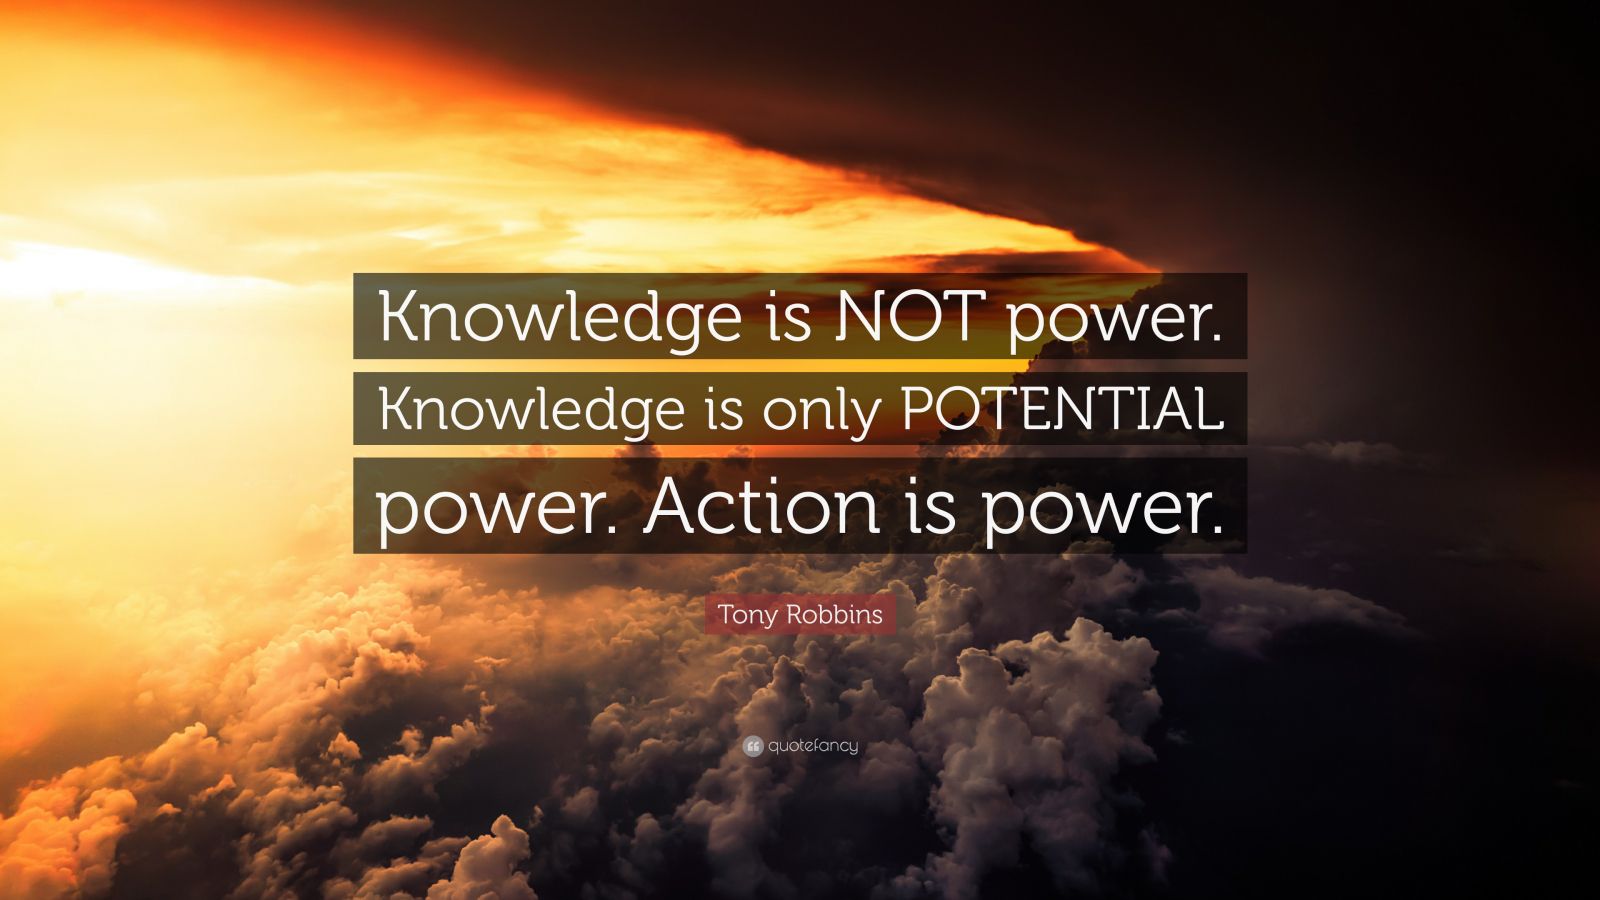 Tony Robbins Quote: “Knowledge is NOT power. Knowledge is only